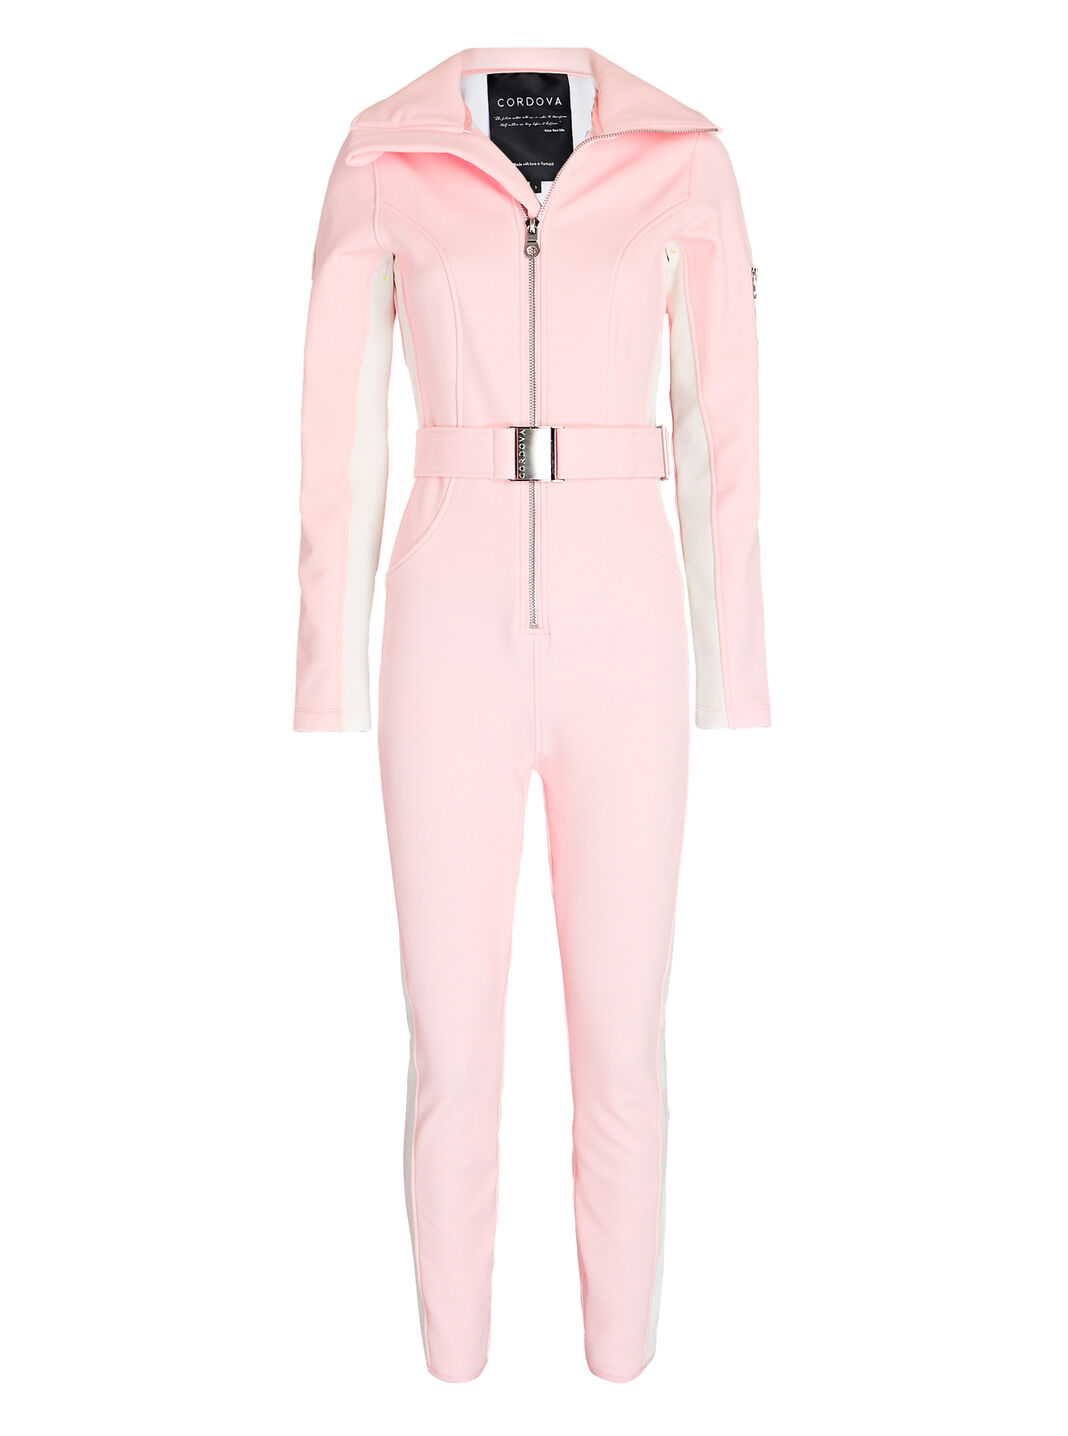 Cordova Belted Two-Tone Ski Suit